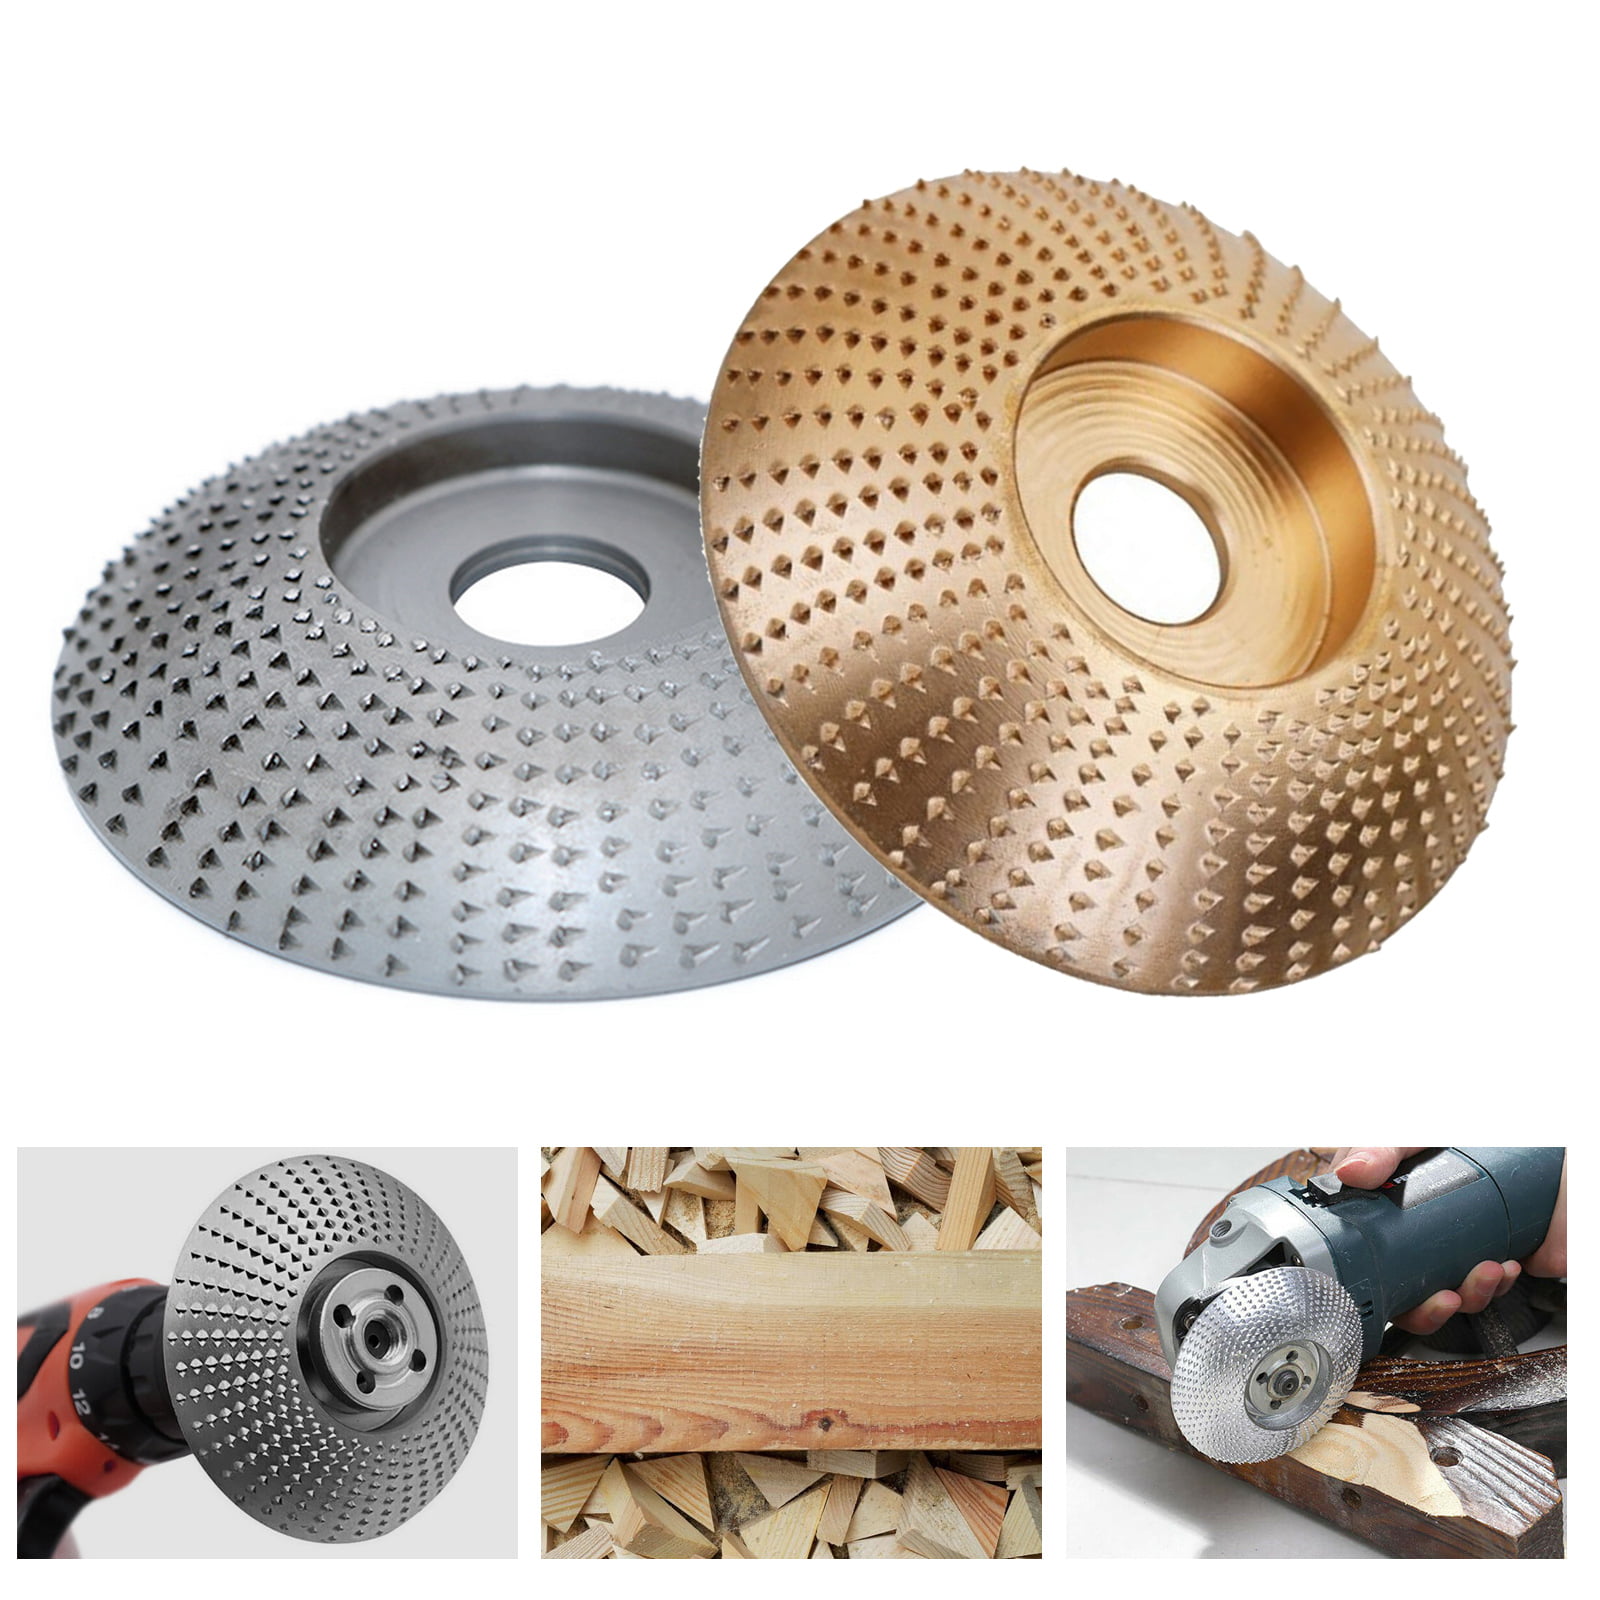 Tungsten Carbide Wood Sanding Carving Shaping Disc Angle Grinder Grinding Wheel 